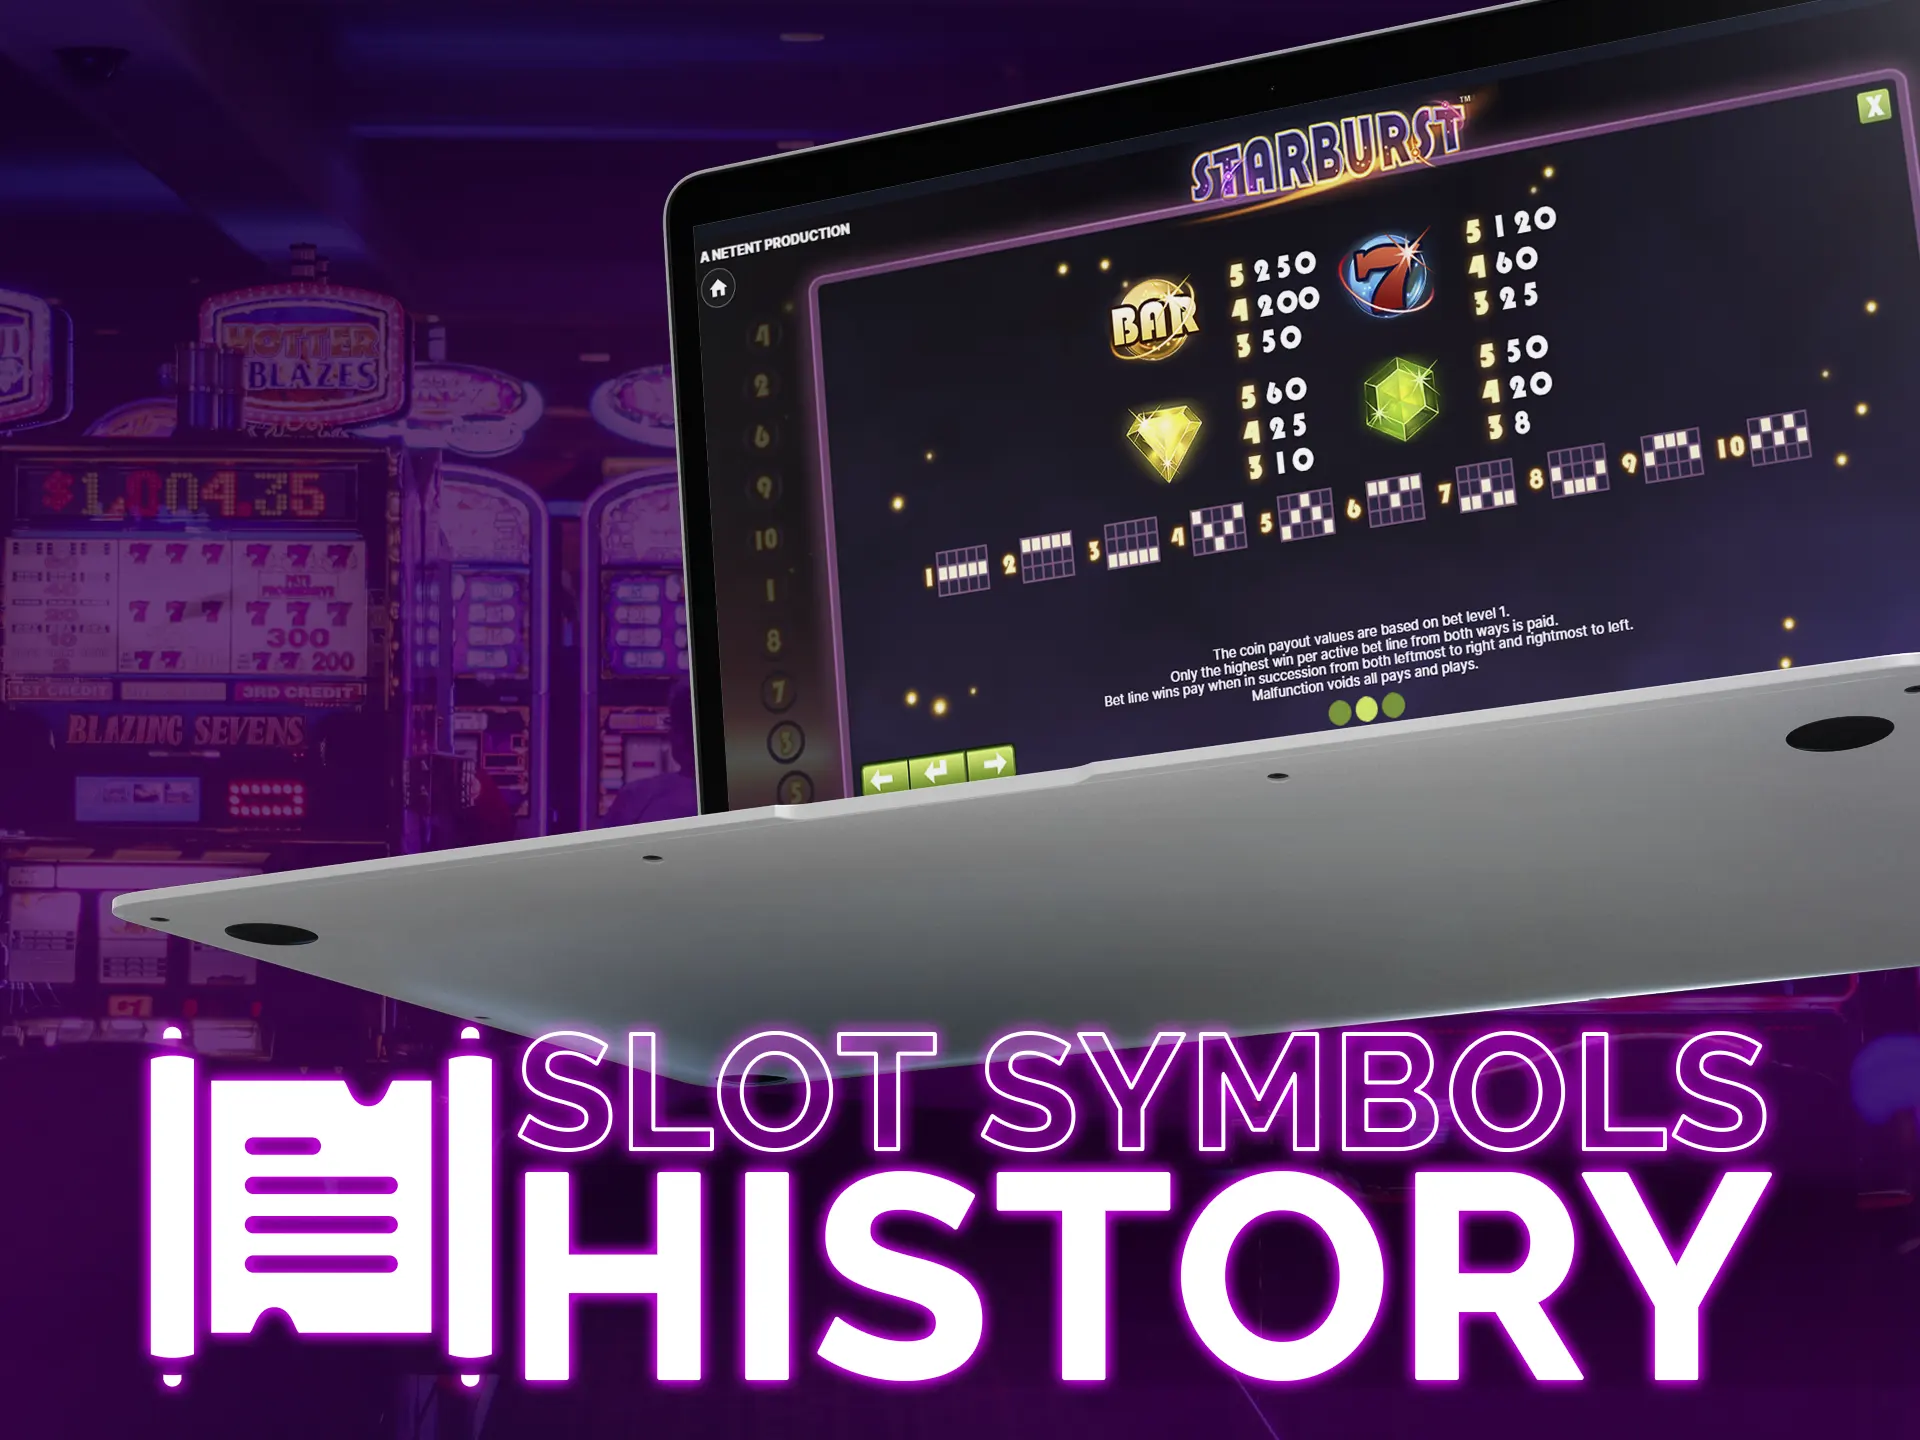 Check slots symbols history to learn the evolution of it.